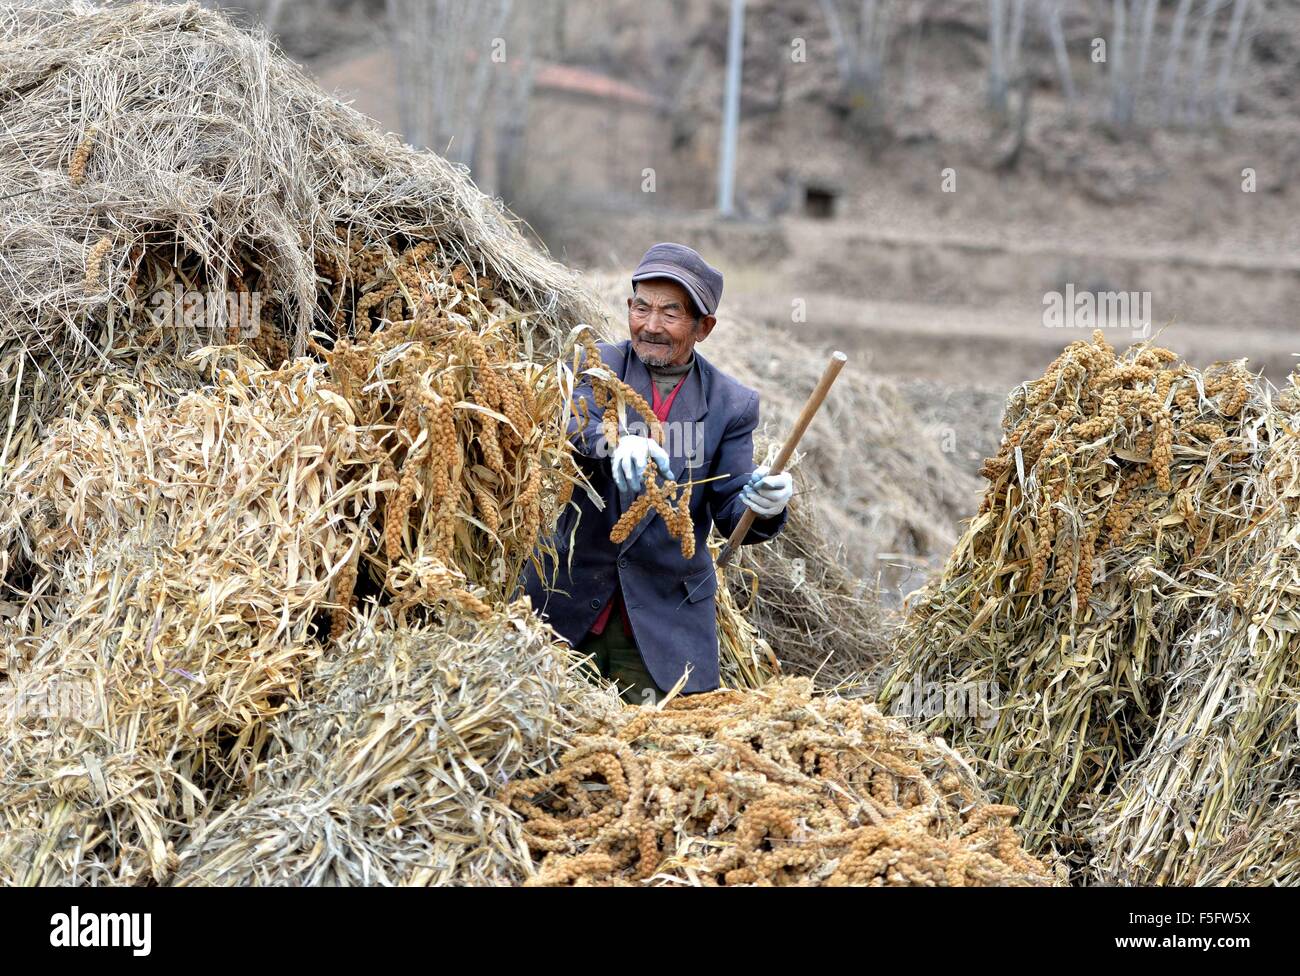 Hohhot, China's Inner Mongolia Autonomous Region. 3rd Nov, 2015. A farmer picks ears of sorghum in Horinger County, north China's Inner Mongolia Autonomous Region, Nov. 3, 2015. Farmers in side crops planting zones of Inner Mongolia were busy harvesting late-maturing crops before the upcoming snow season. © Ren Junchuan/Xinhua/Alamy Live News Stock Photo